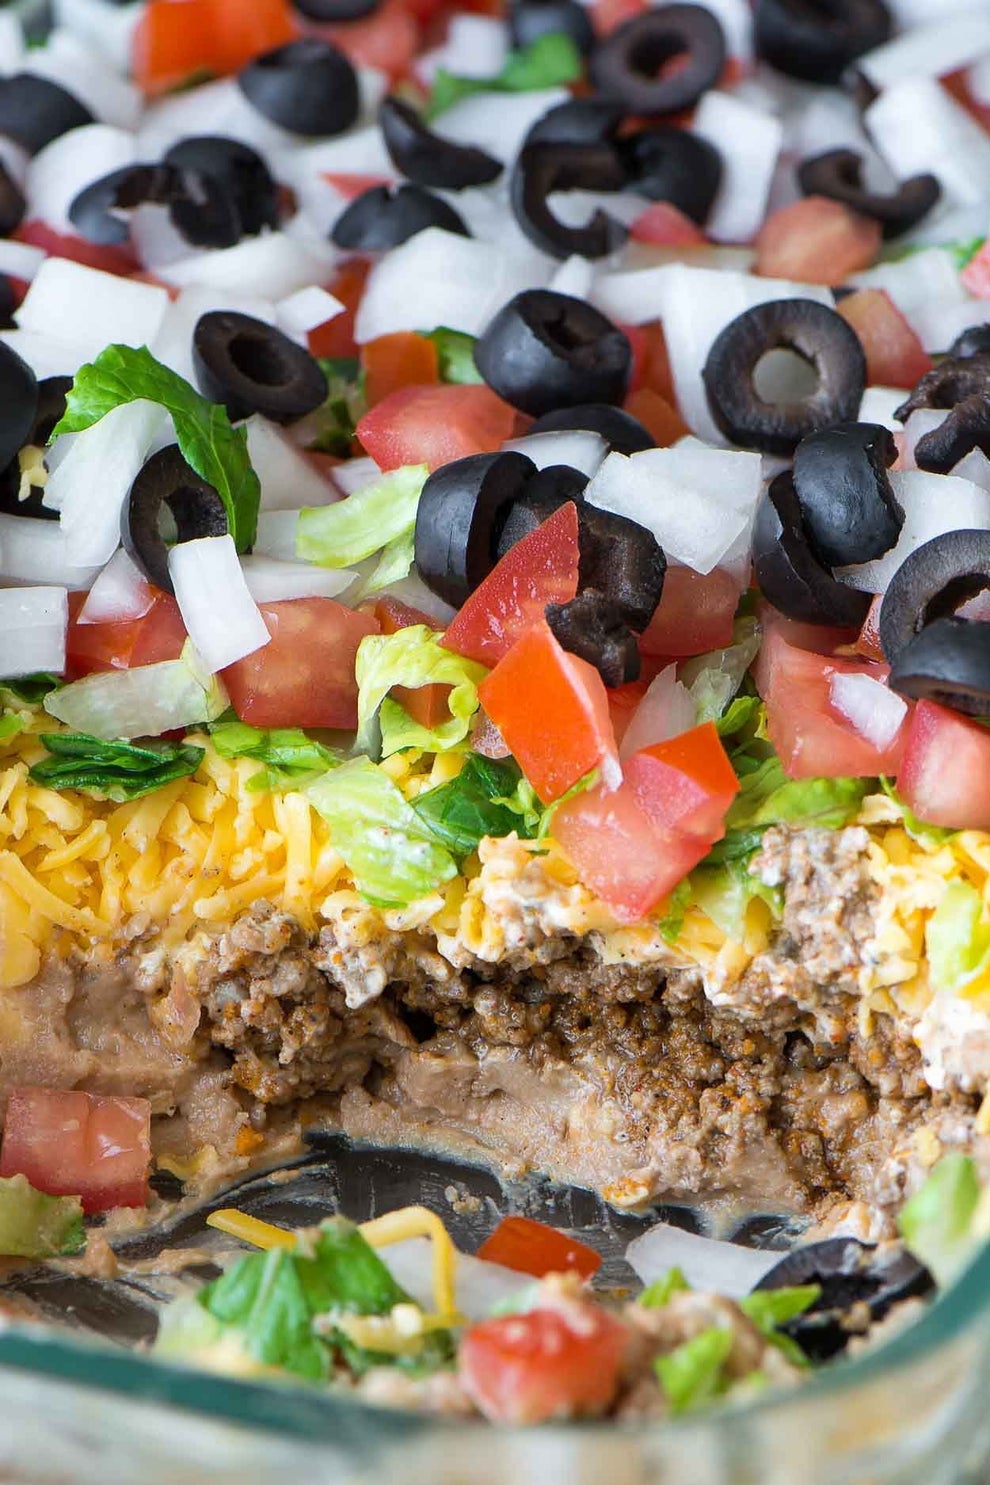 28 Crowd-Pleasing Game Day Recipes You Can Make In 30 Minutes